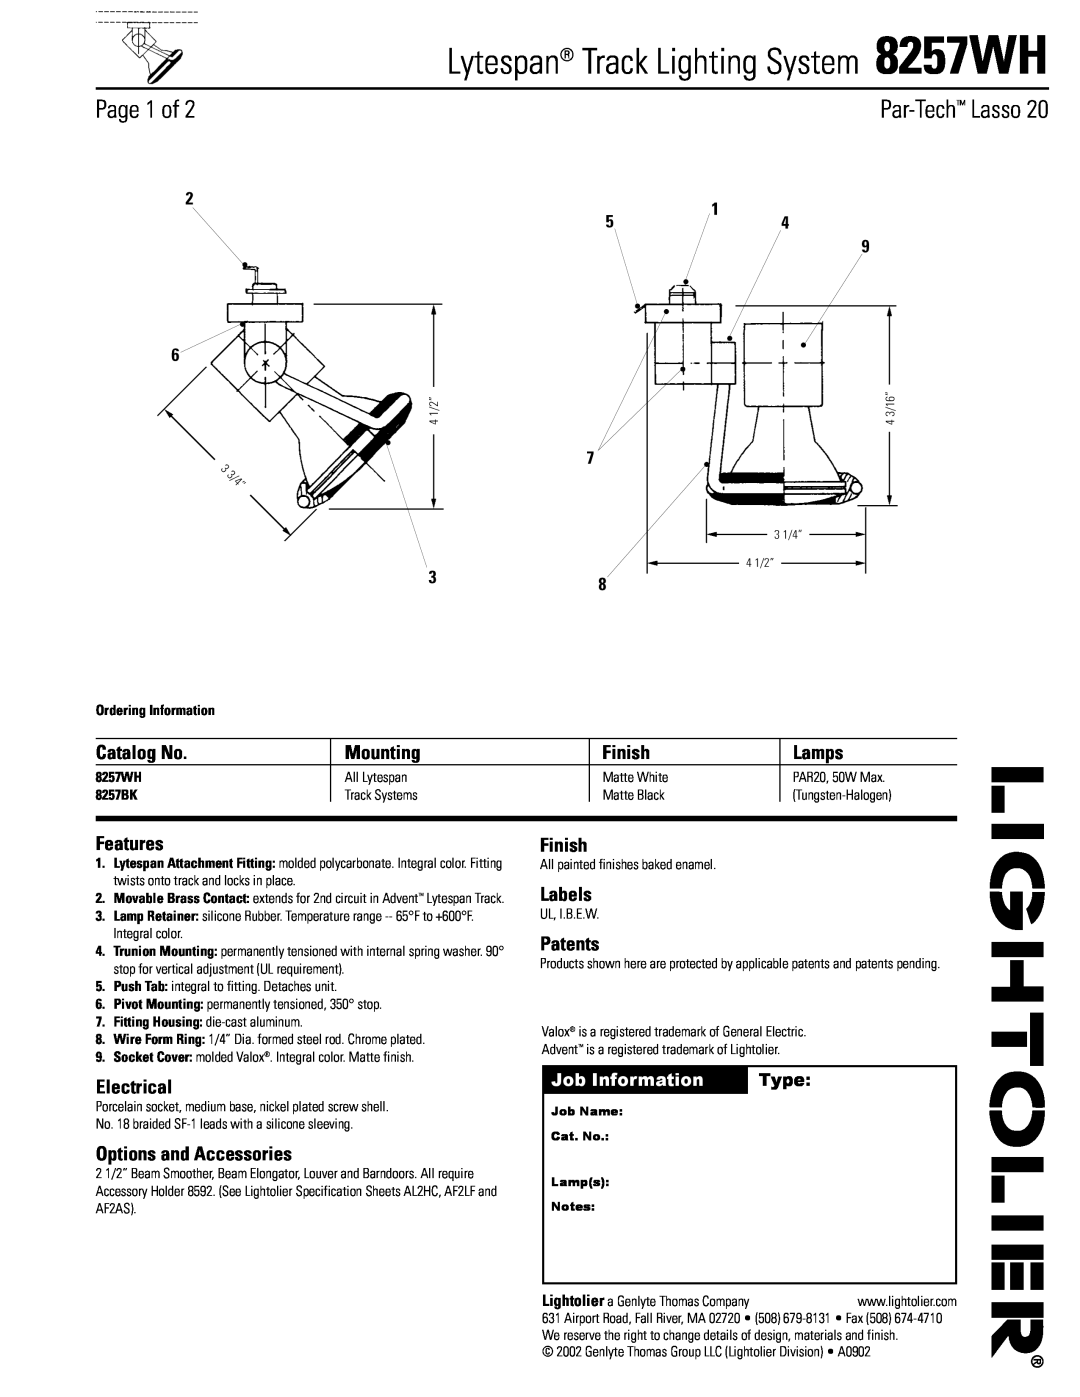 Lightolier specifications Lytespan Track Lighting System 8257WH, Page 1 of, Catalog No, Mounting, Finish, Lamps, Labels 